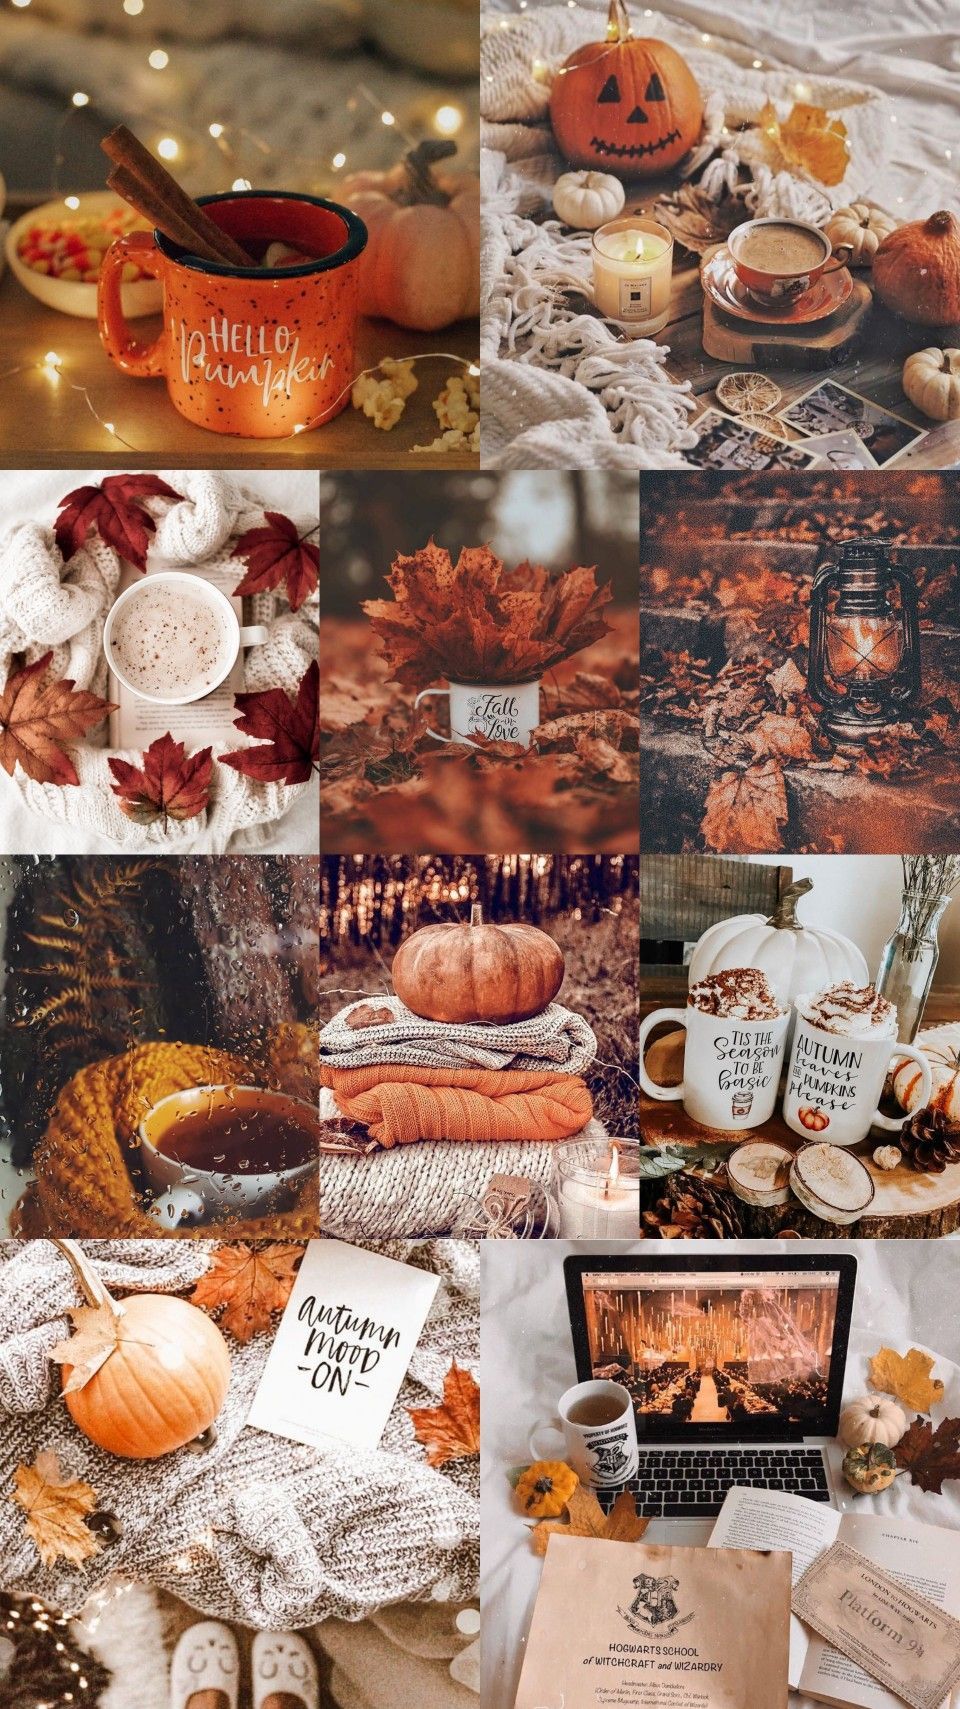 Aesthetic fall wallpaper collage with pumpkins, leaves, and warm beverages. - Thanksgiving